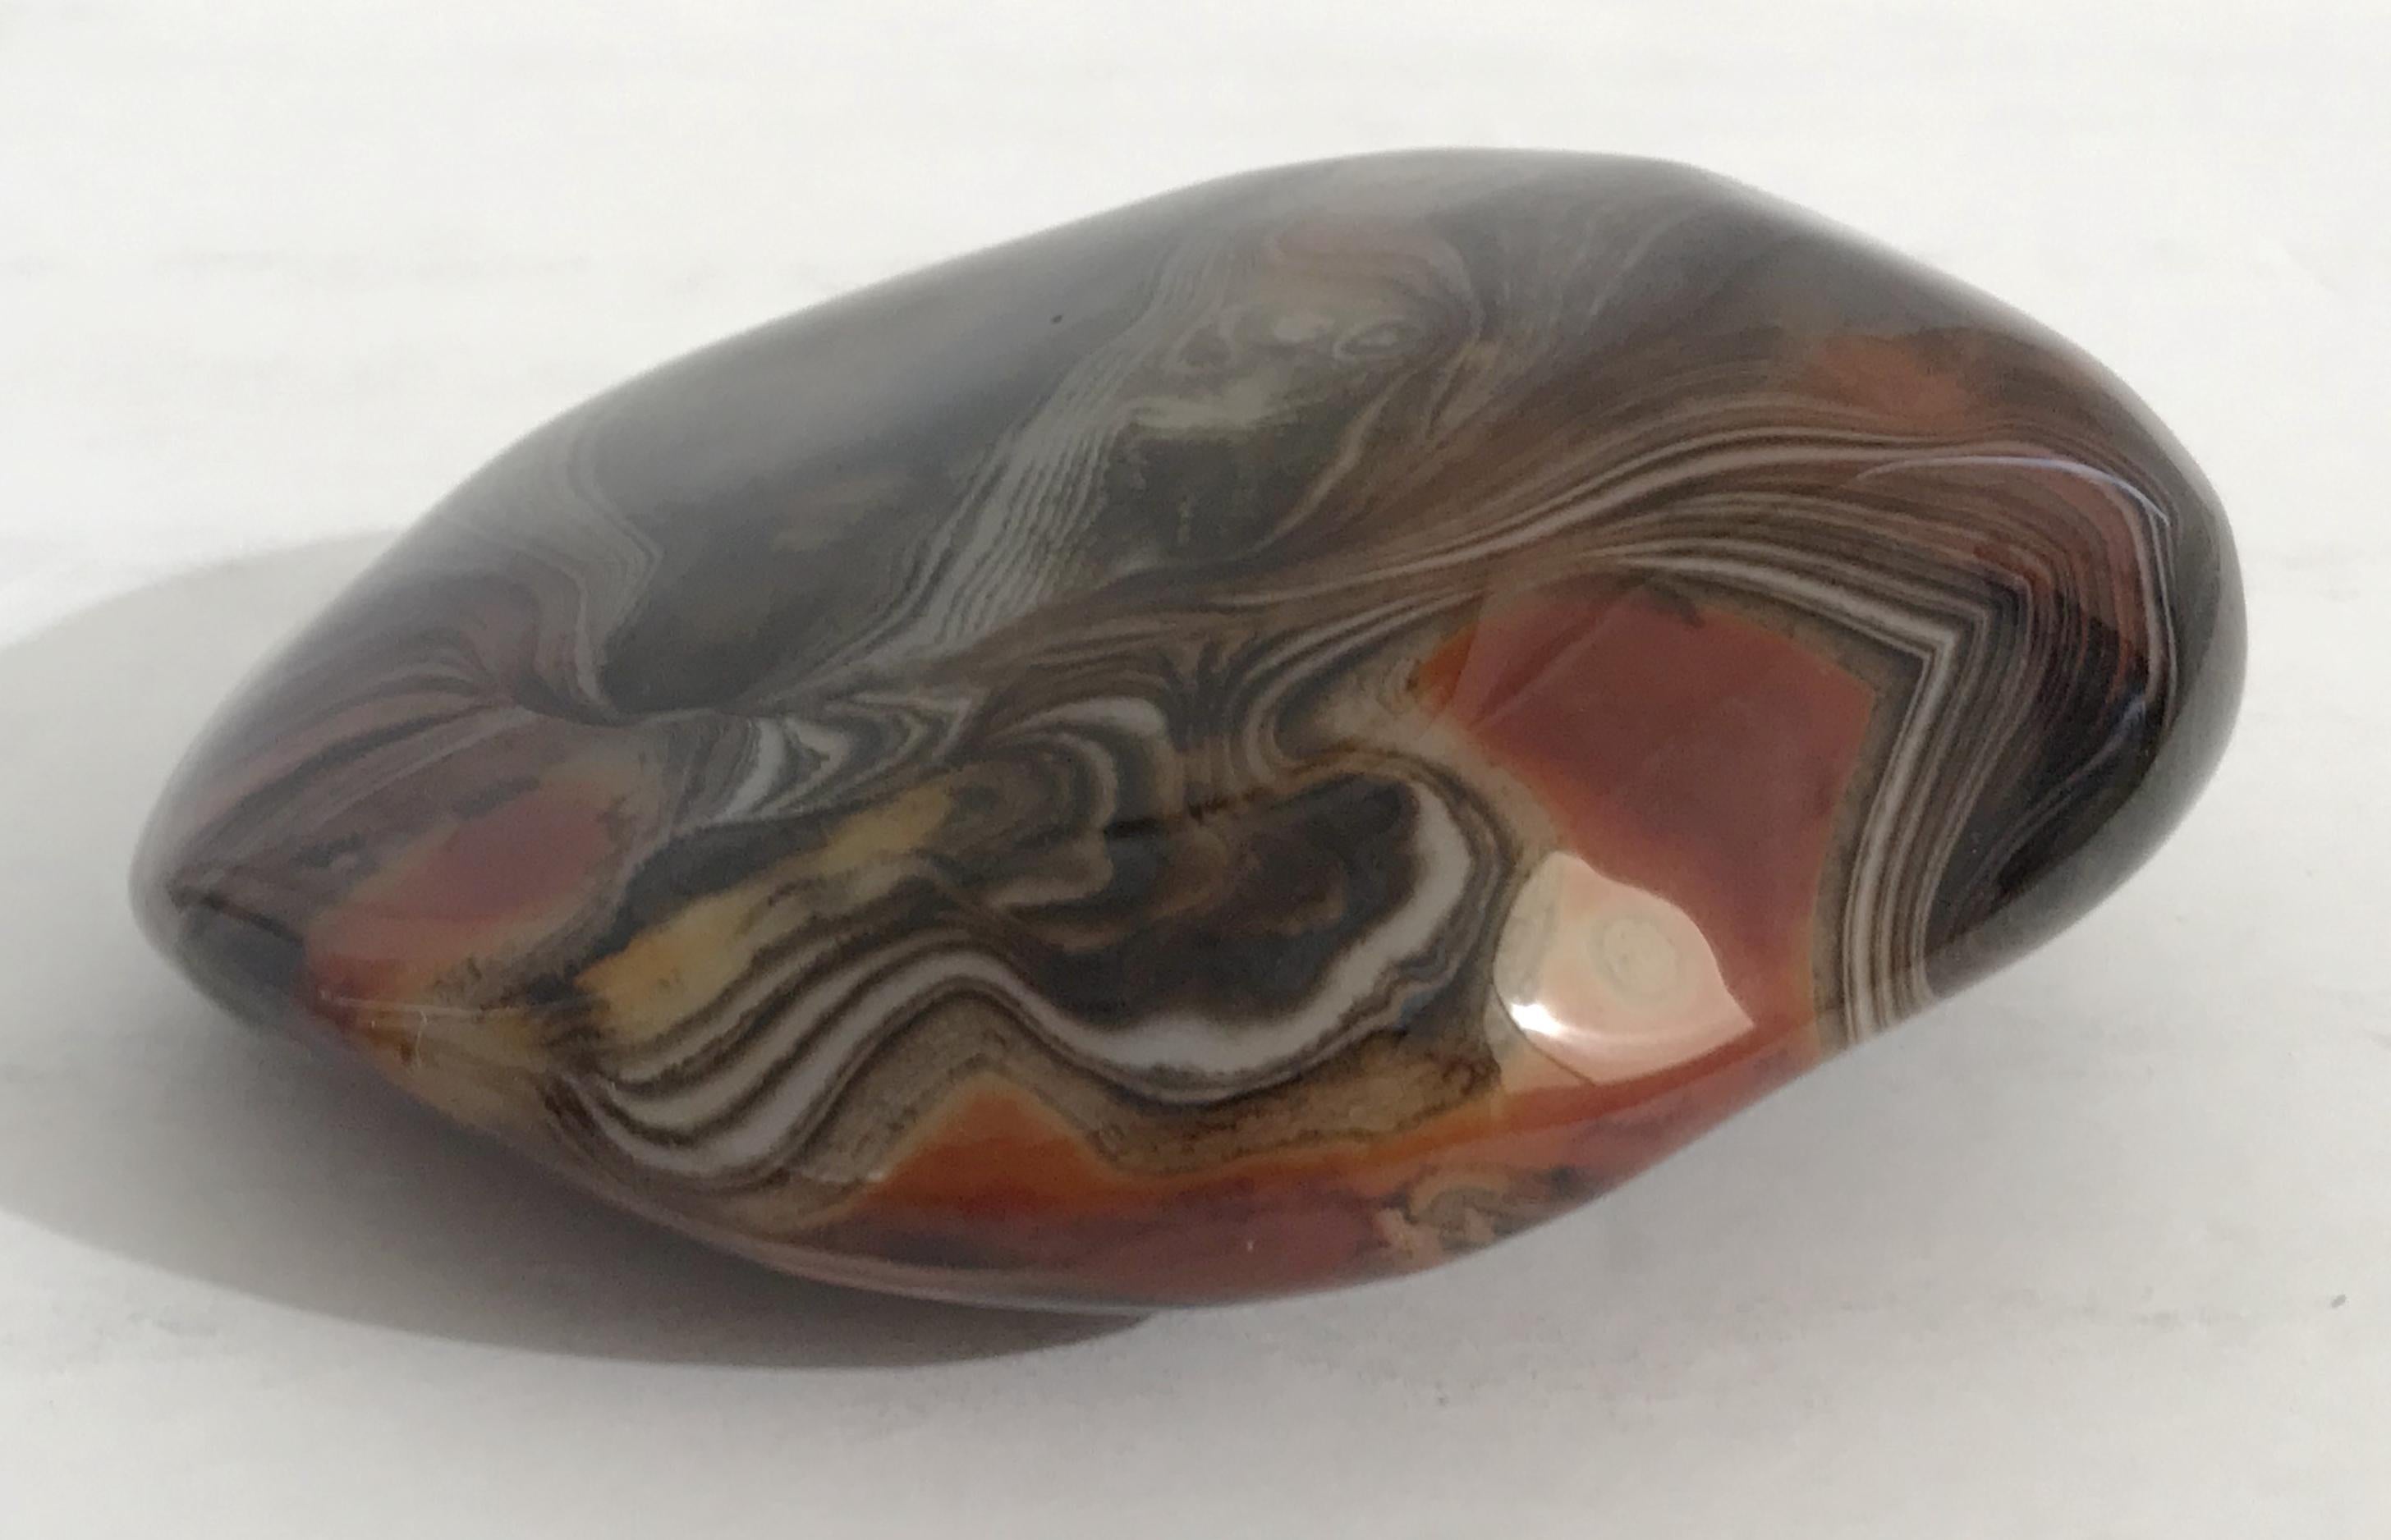 Hand polished agate onyx stone paperweight in black, brown, and red intricate layered patterns
Measures: length 4.75 inches, width 4.25 inches, height 2 inches
1 in stock in Palm Springs ON 50% OFF SALE for $225 !!
This piece makes for a great and